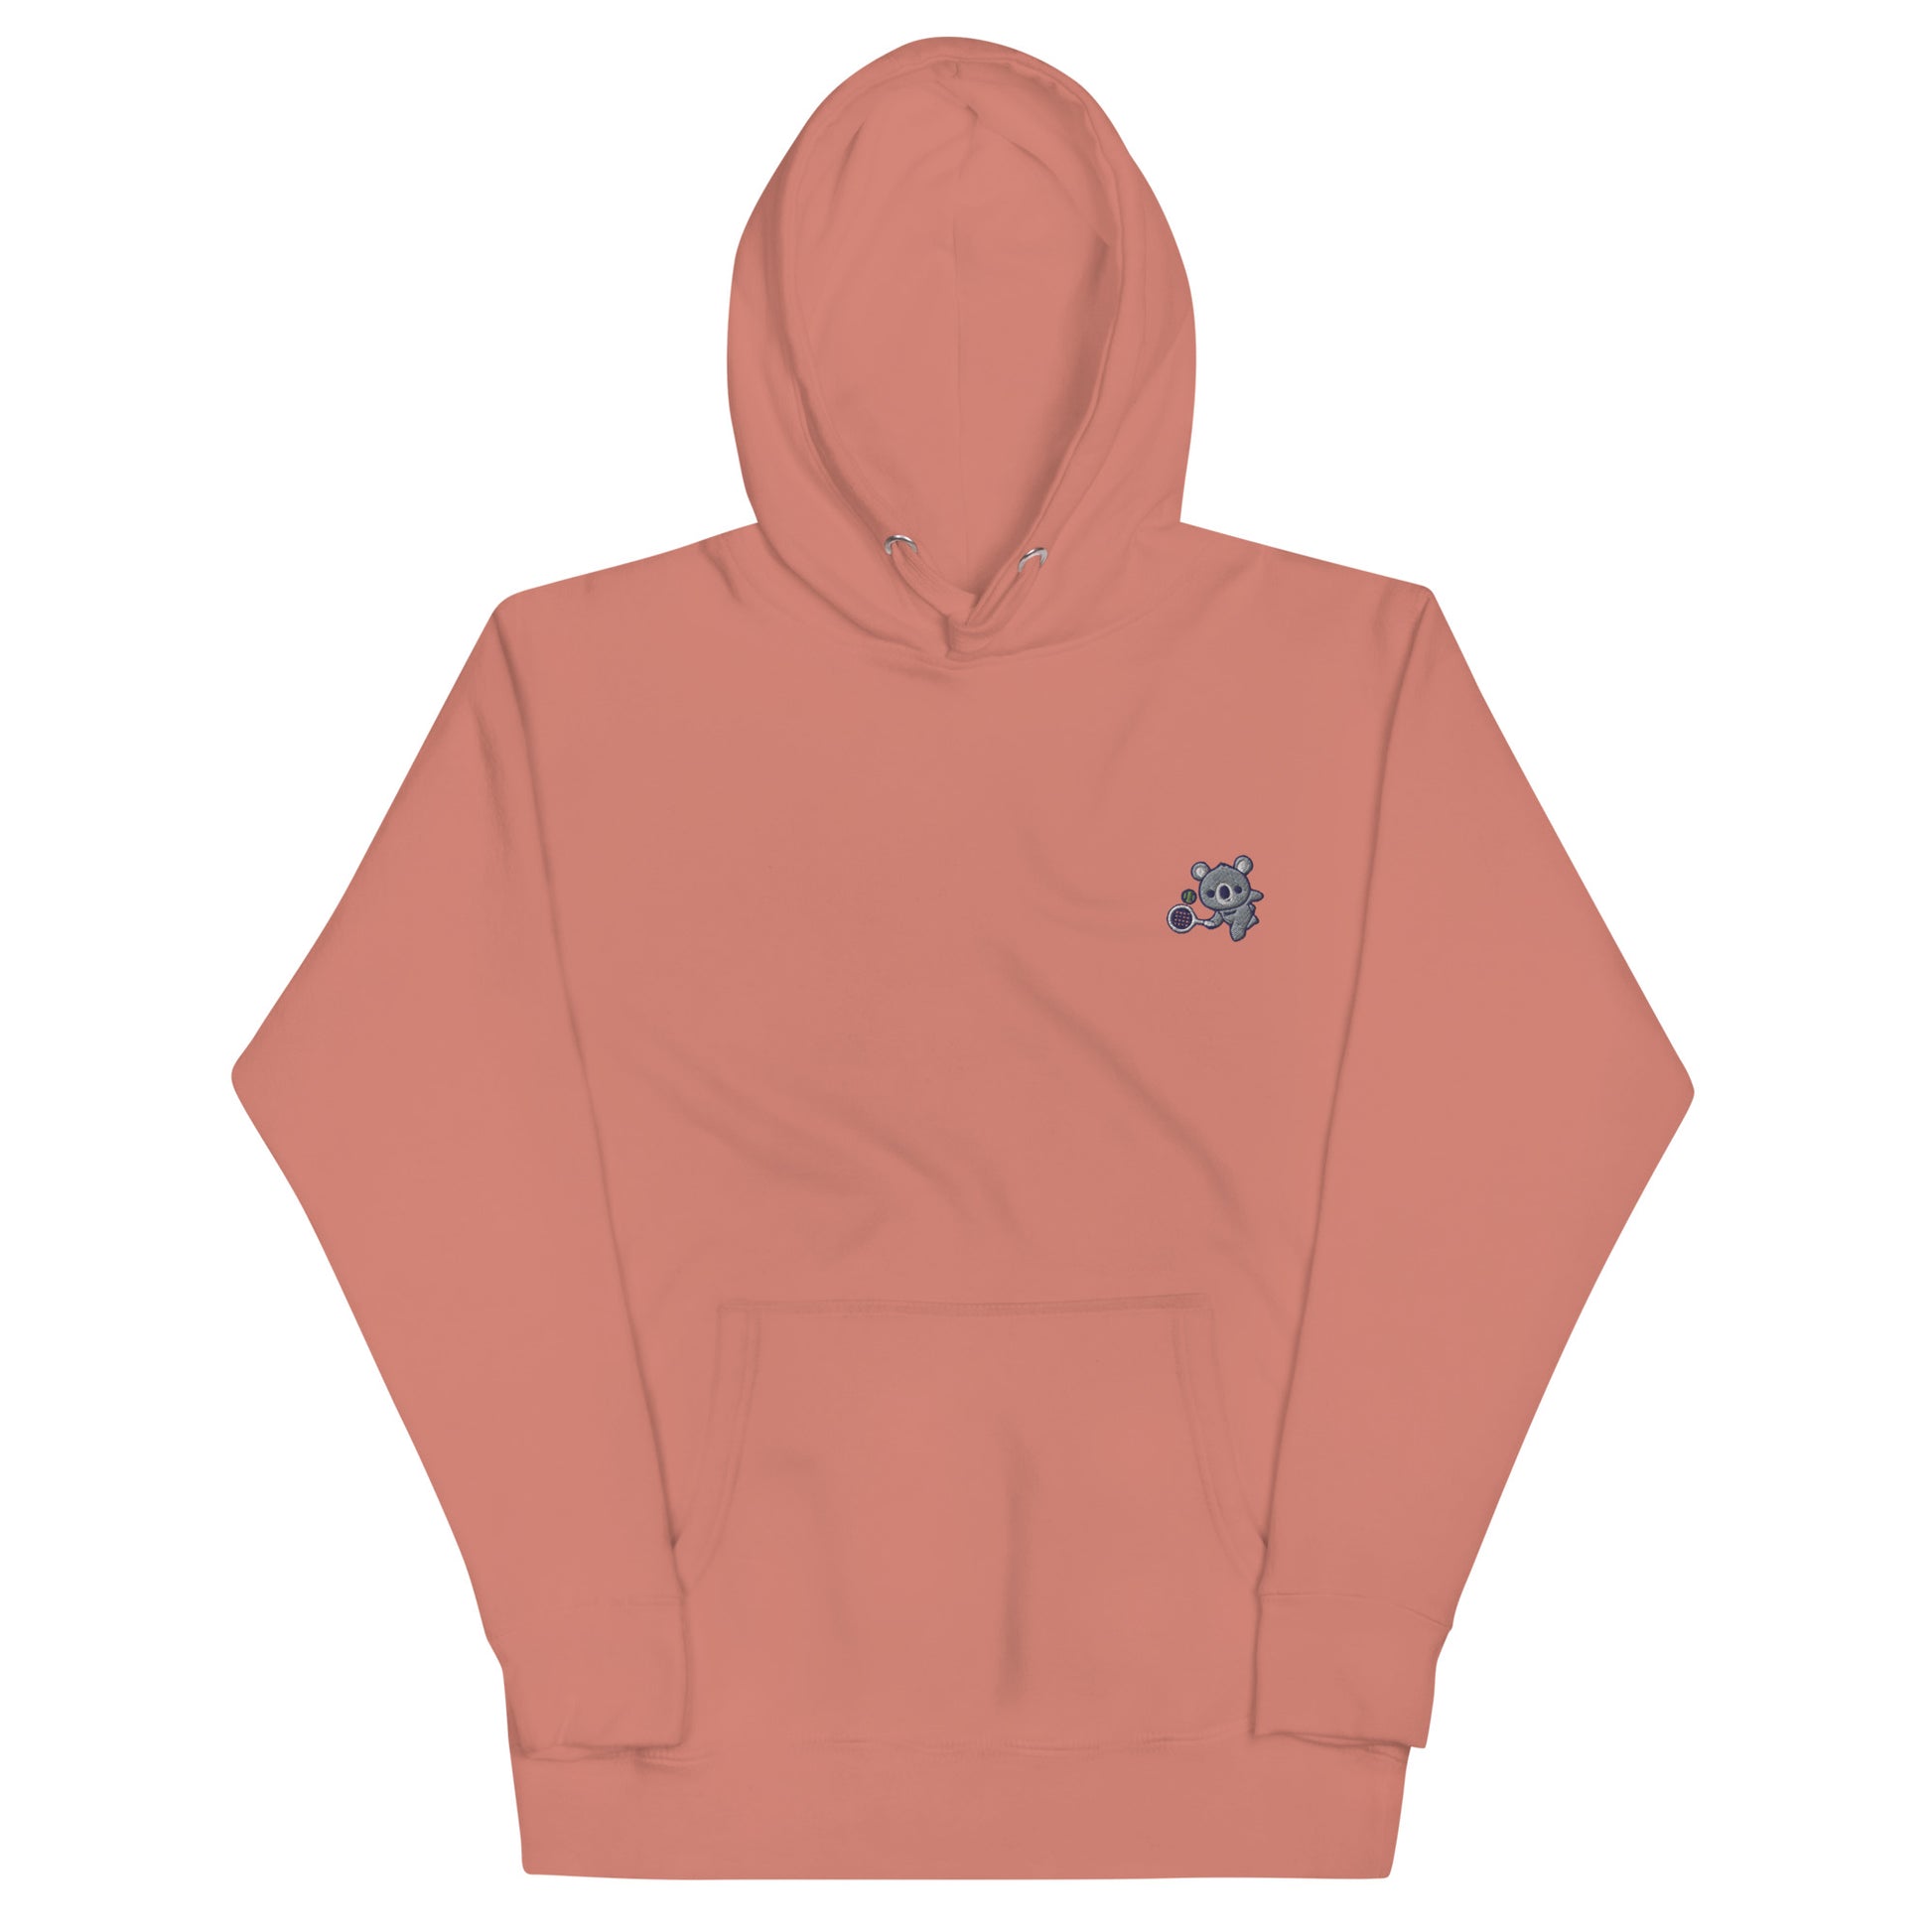 ADULT UNISEX KEN HOODIE - EMBROIDERED LOGO - AVAILABLE IN 10 COLORS - TOKKITENNIS